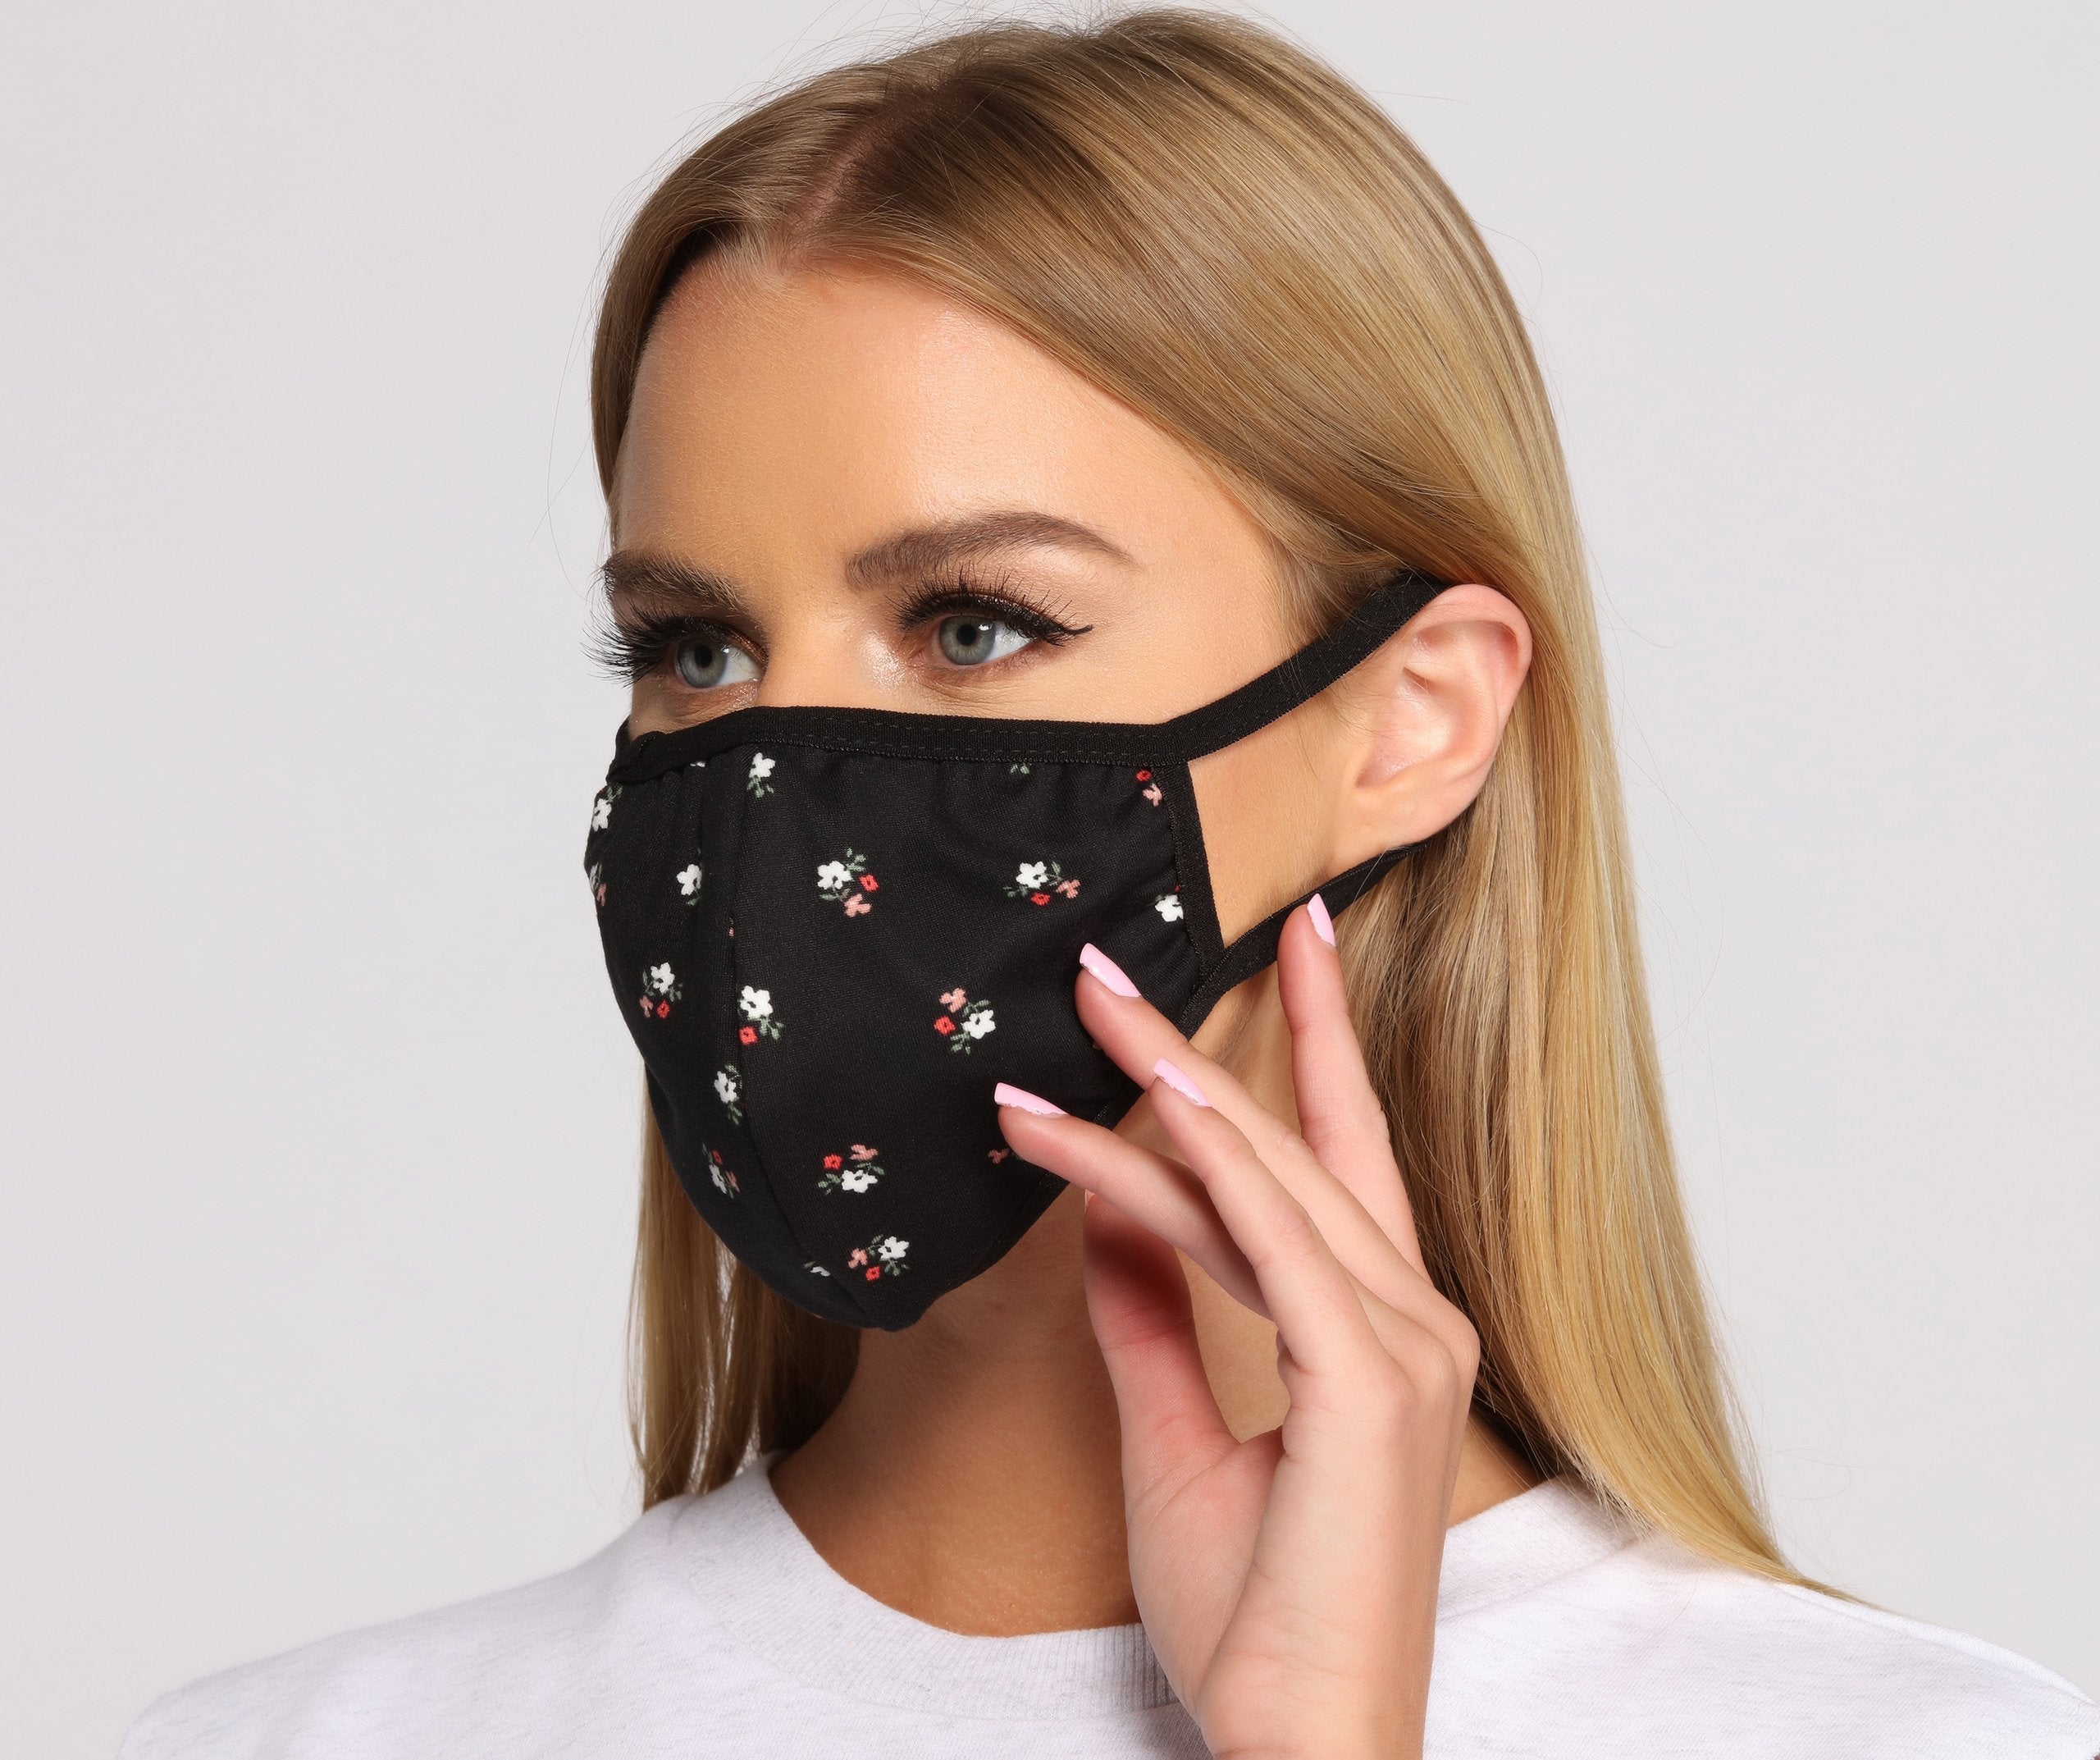 Dark Floral Face Mask With Earloops - Lady Occasions